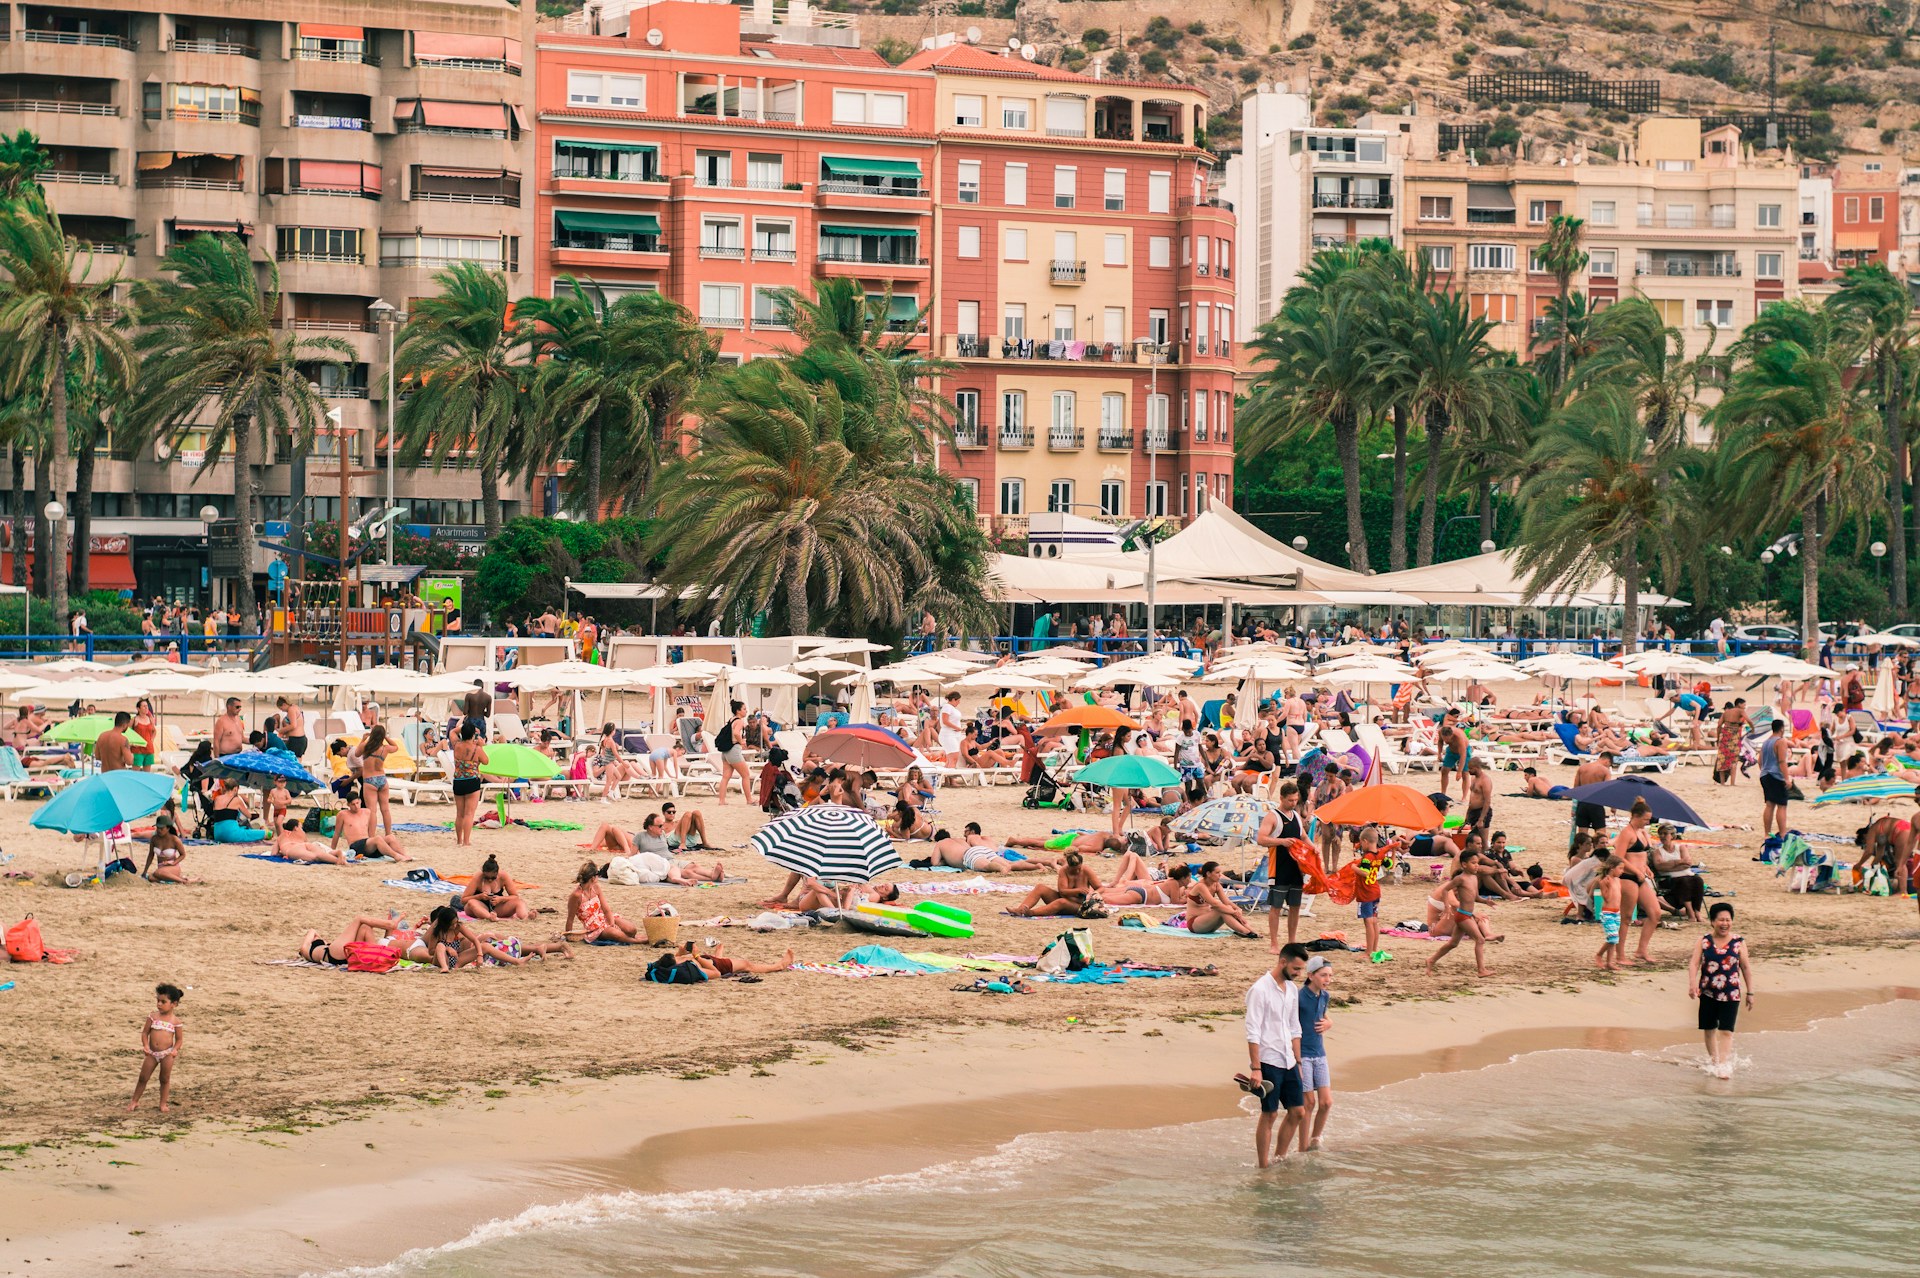 Playa del Postiguet is a lively beach area in Alicante